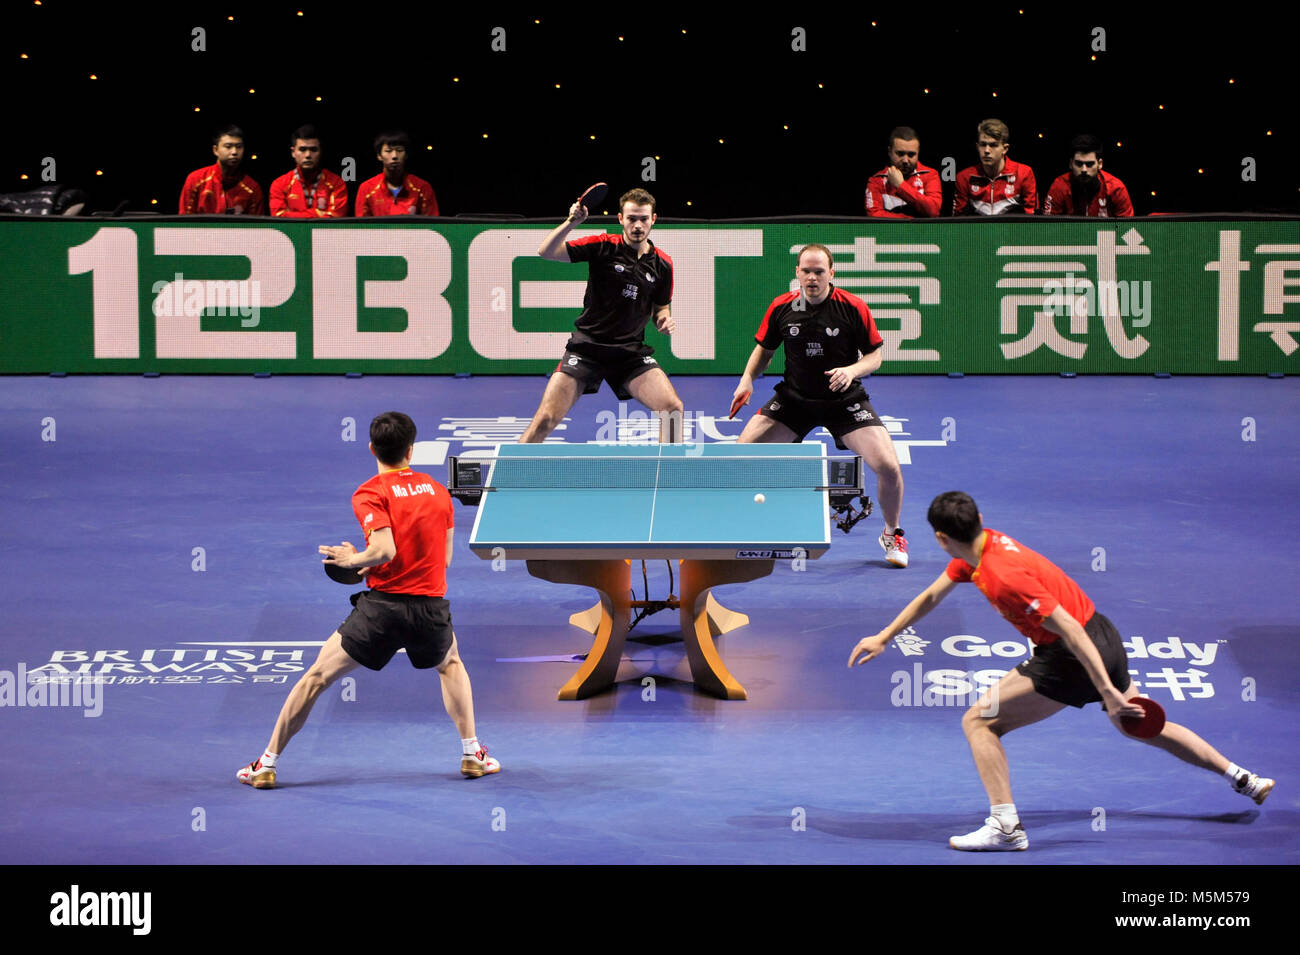 London, UK.  24 February 2018. Samuel Walker (ENG) and Paul Drinkhall (ENG) take part in a semi-final doubles match vs Xu Xin (CHN) and Ma Long (CHN) at the ITTF Team World Cup London 2018 taking place at the Copper Box Arena at the Queen Elizabeth Olympic Park. China would win 3-0 and progress to the final. Credit: Stephen Chung / Alamy Live News Stock Photo